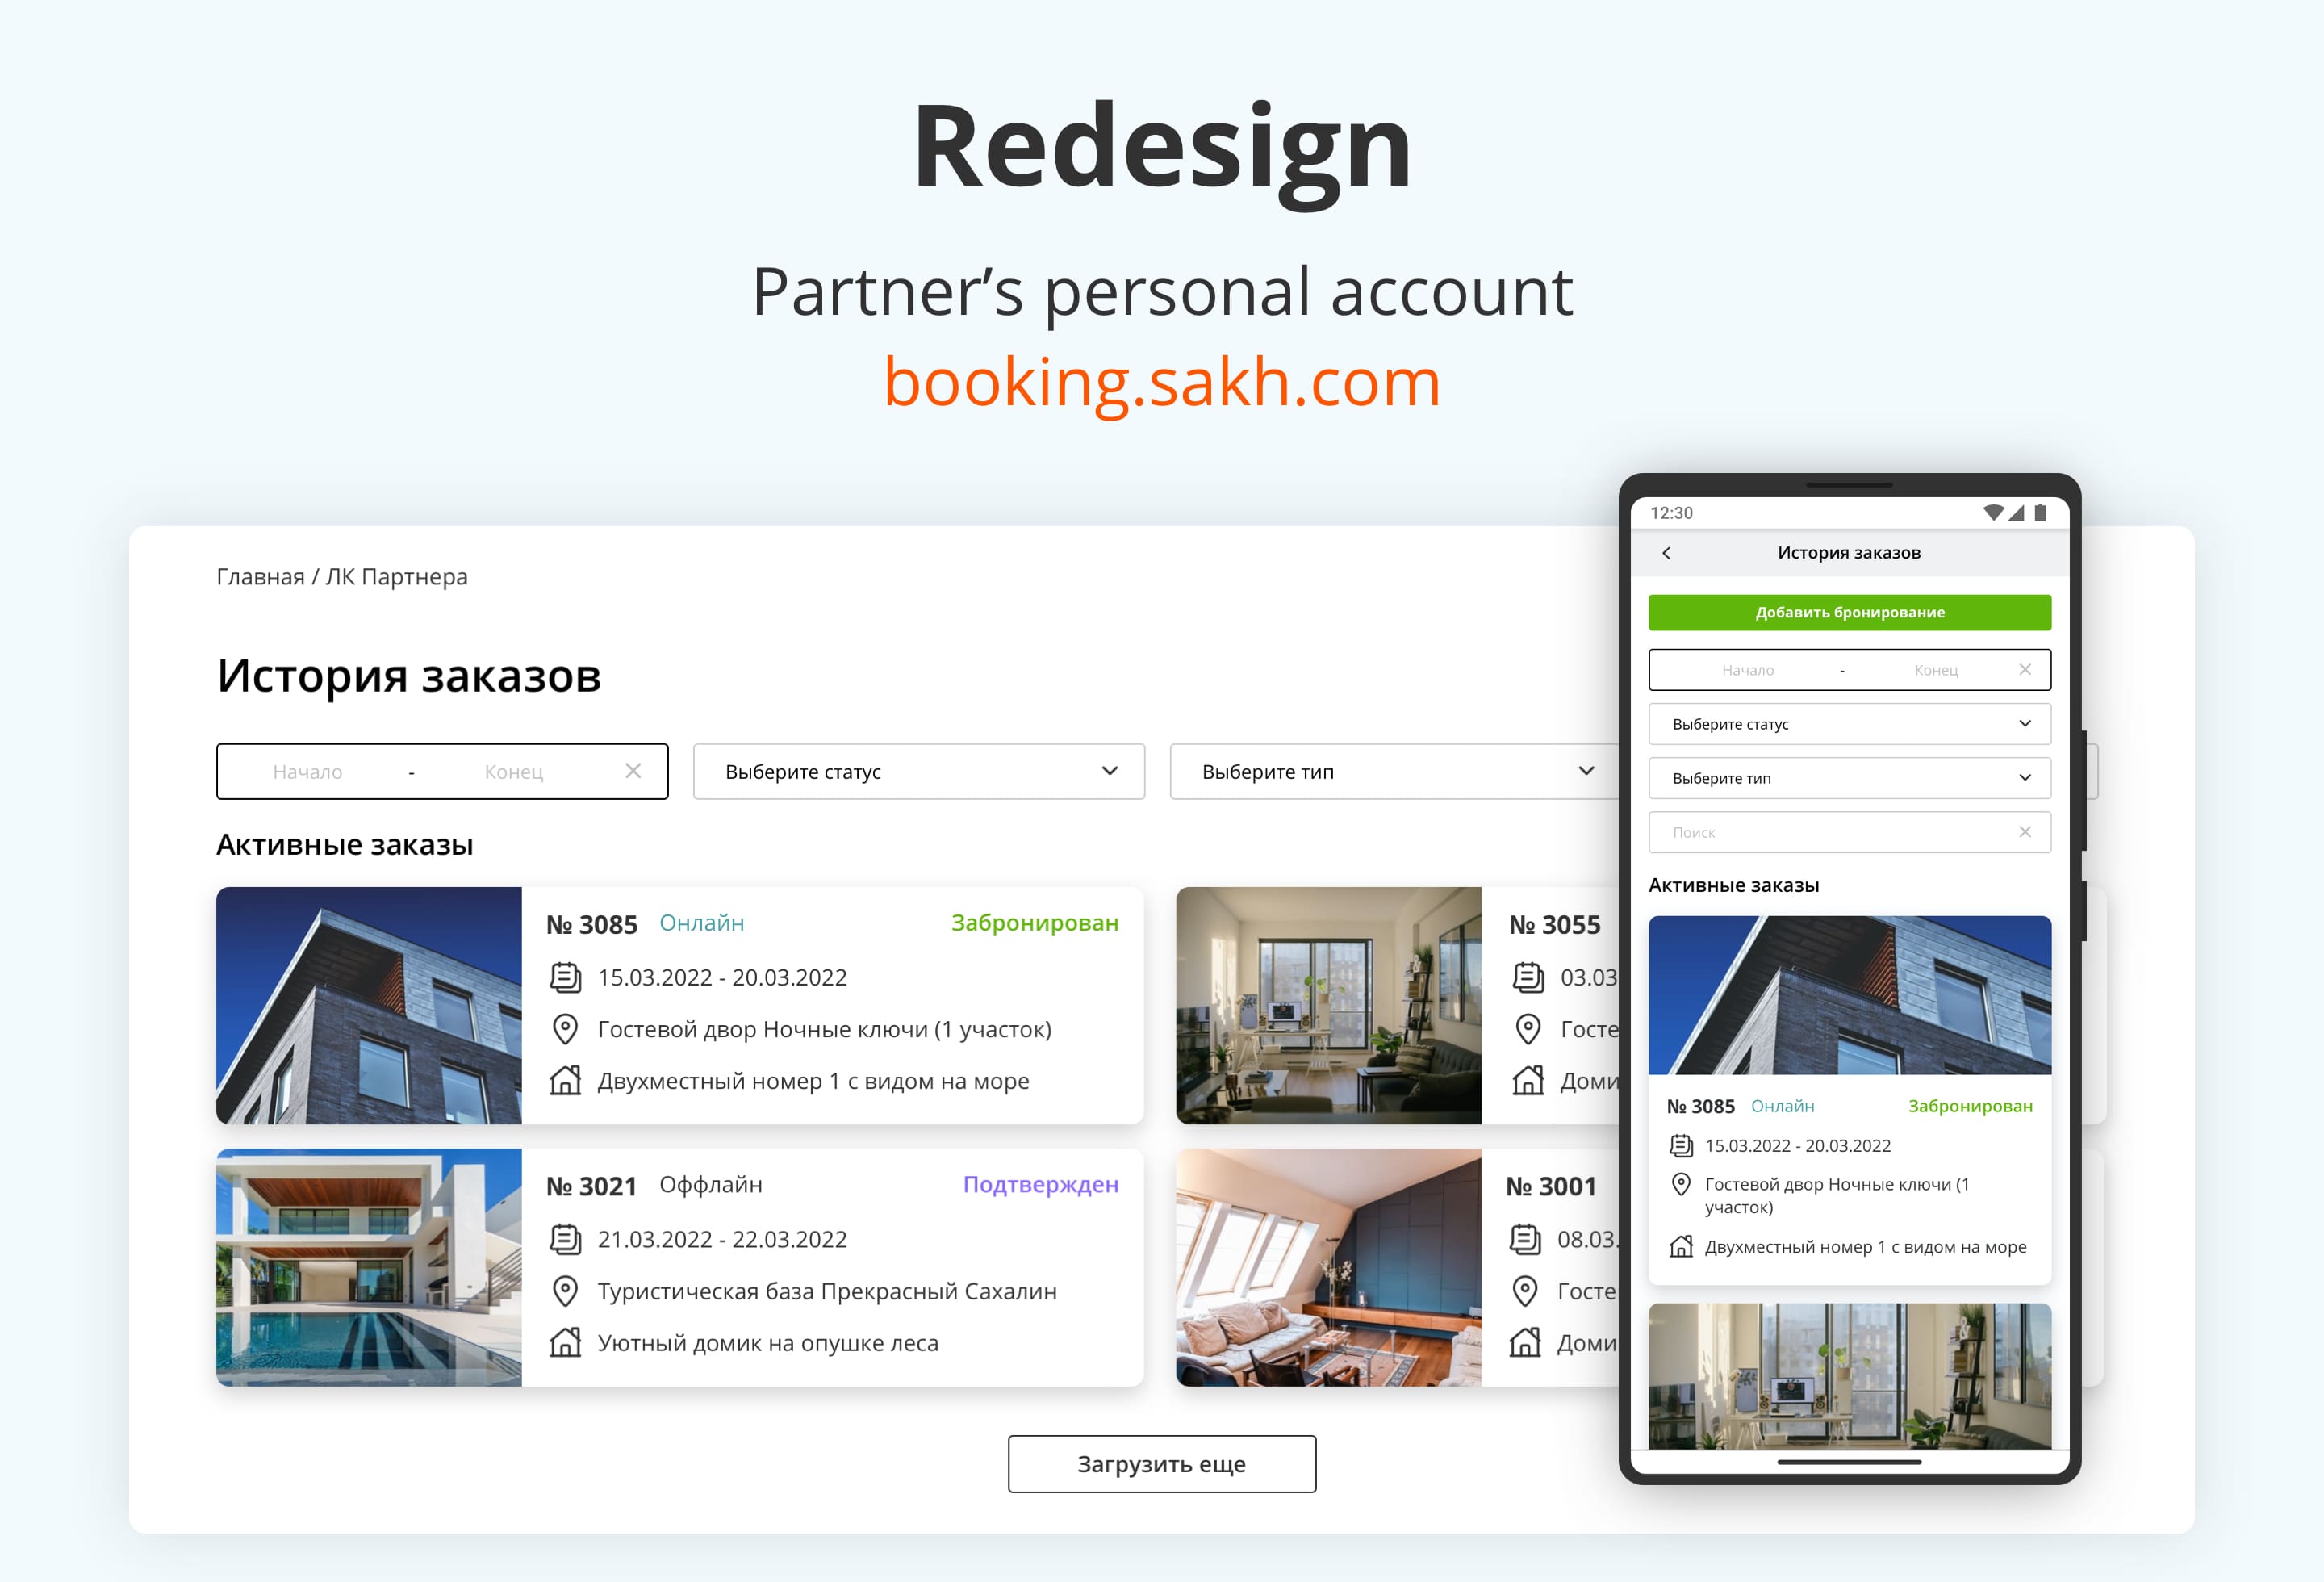 BookingSakh.com – Redesign personal partner’s account